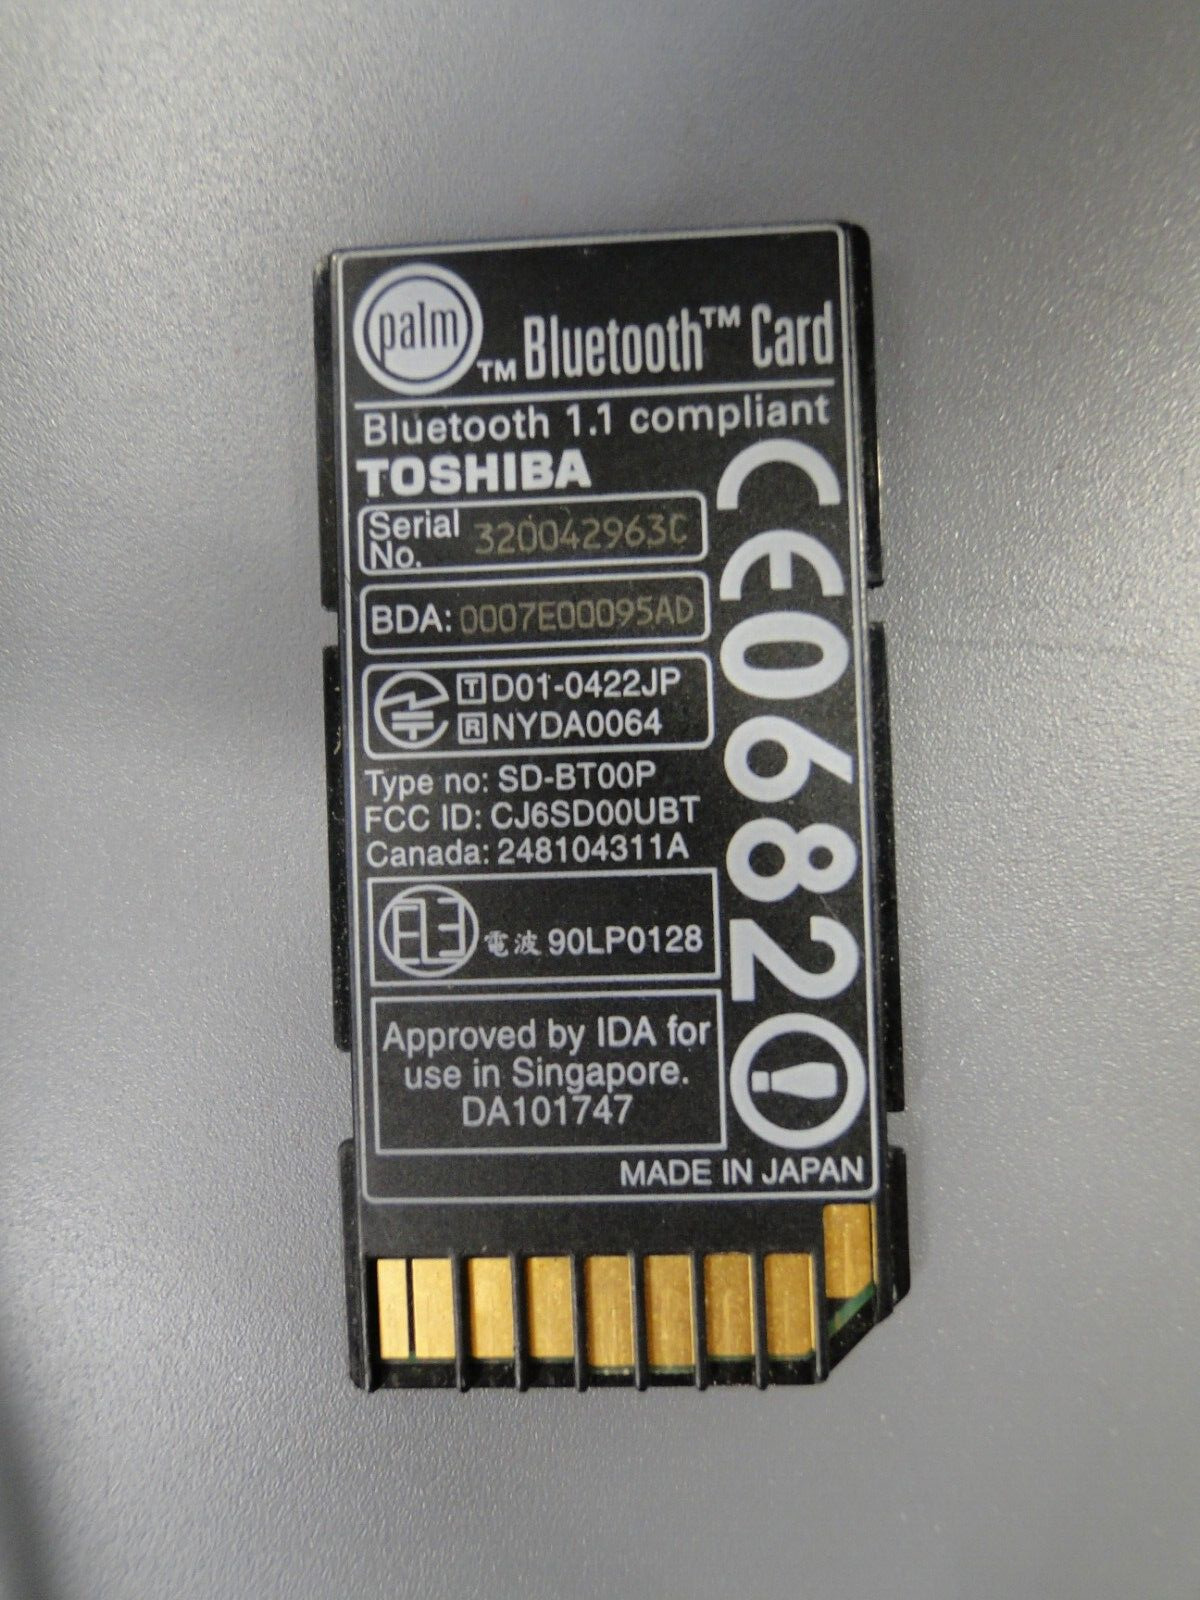 Toshiba Palm Bluetooth 1.1 SD Style Card - SD-BT00P - made in Japan